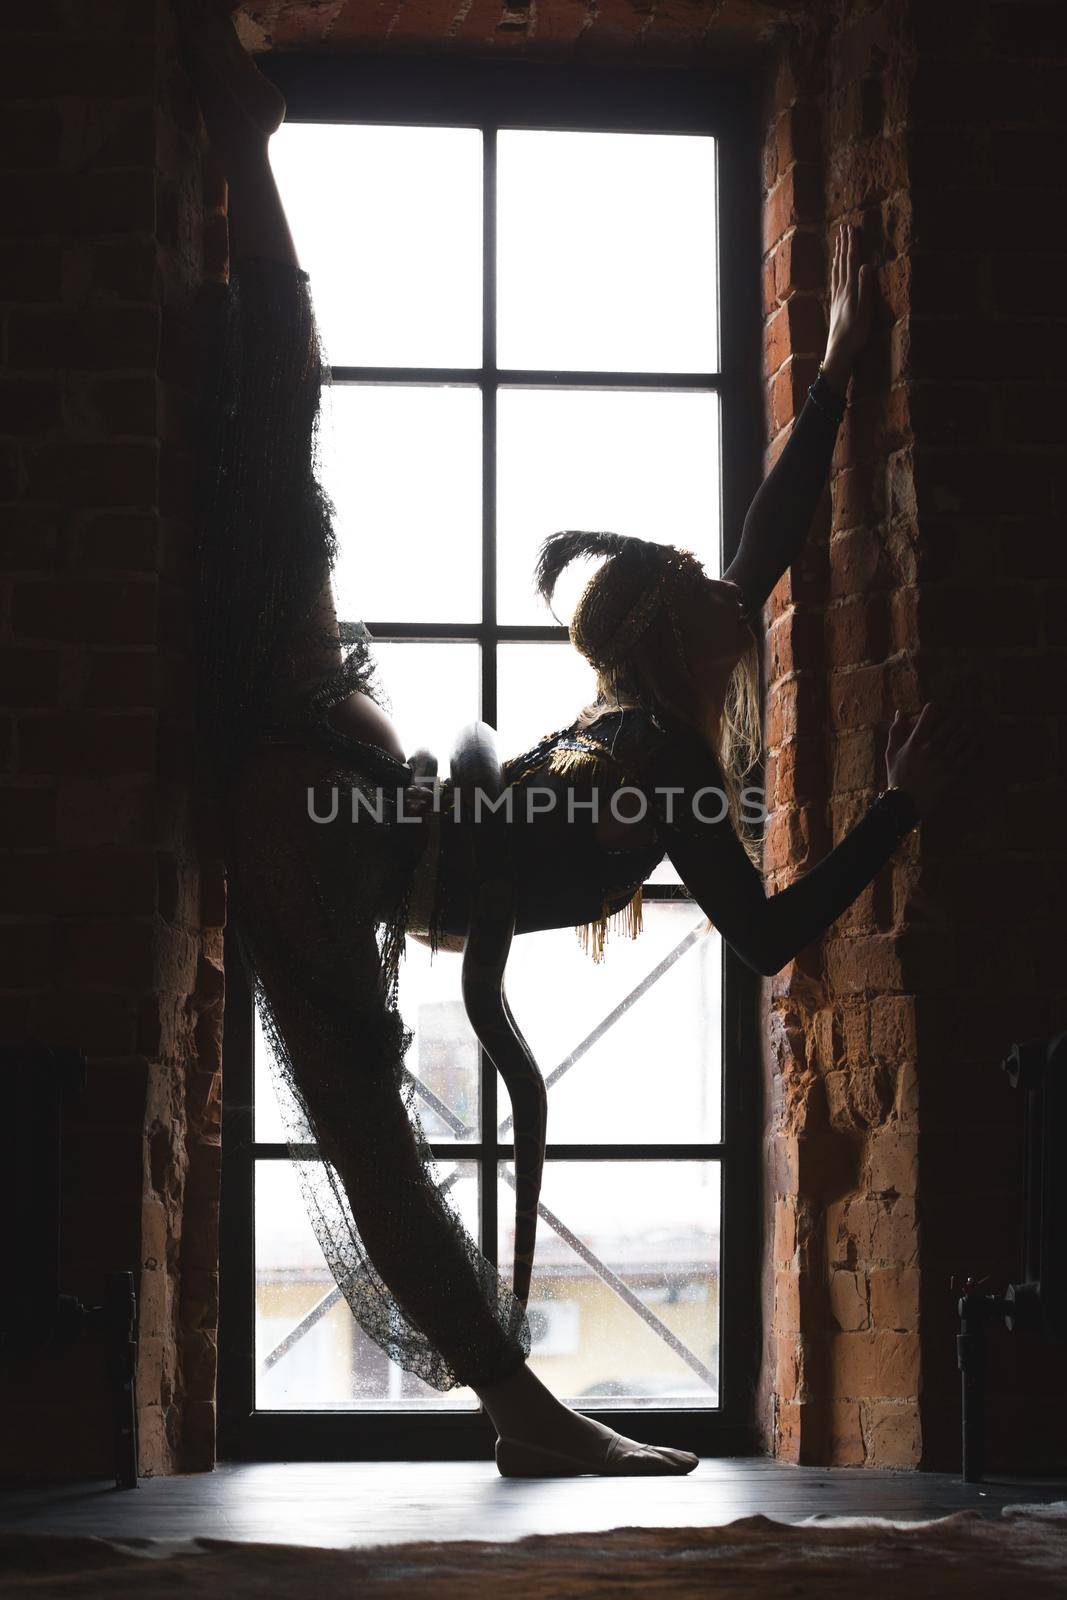 Slim female silhouette performing dance with a snake in front of window by Studia72